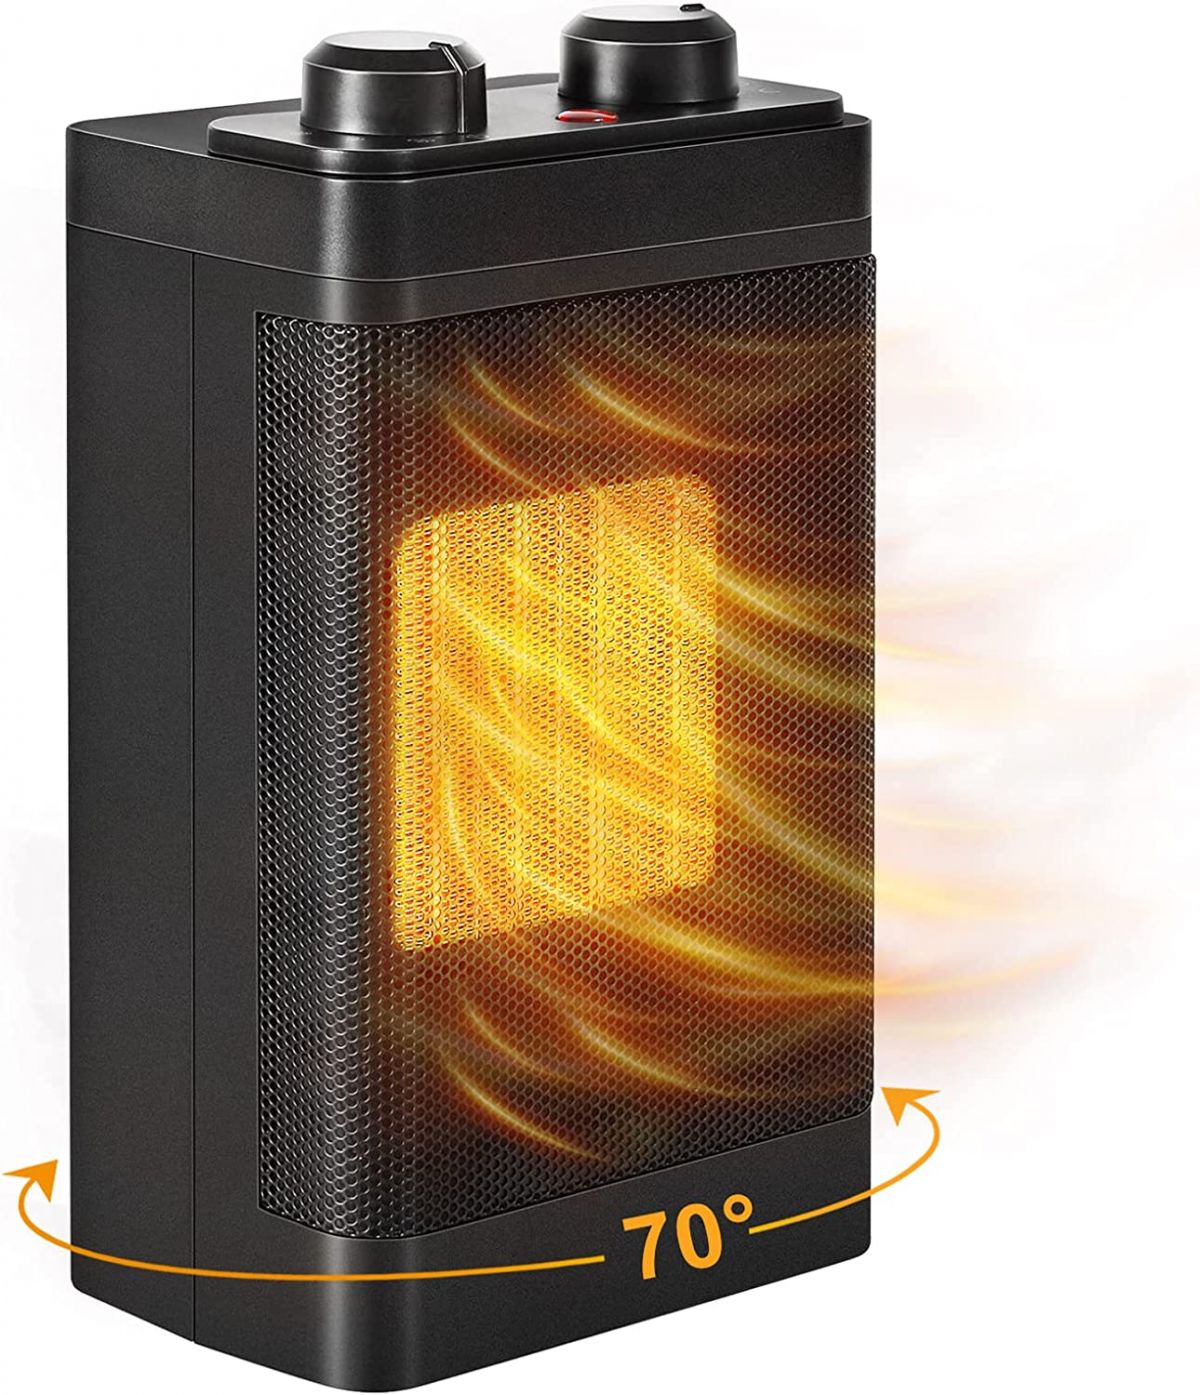 Portable Electric Space Heater with Thermostat 1500 W